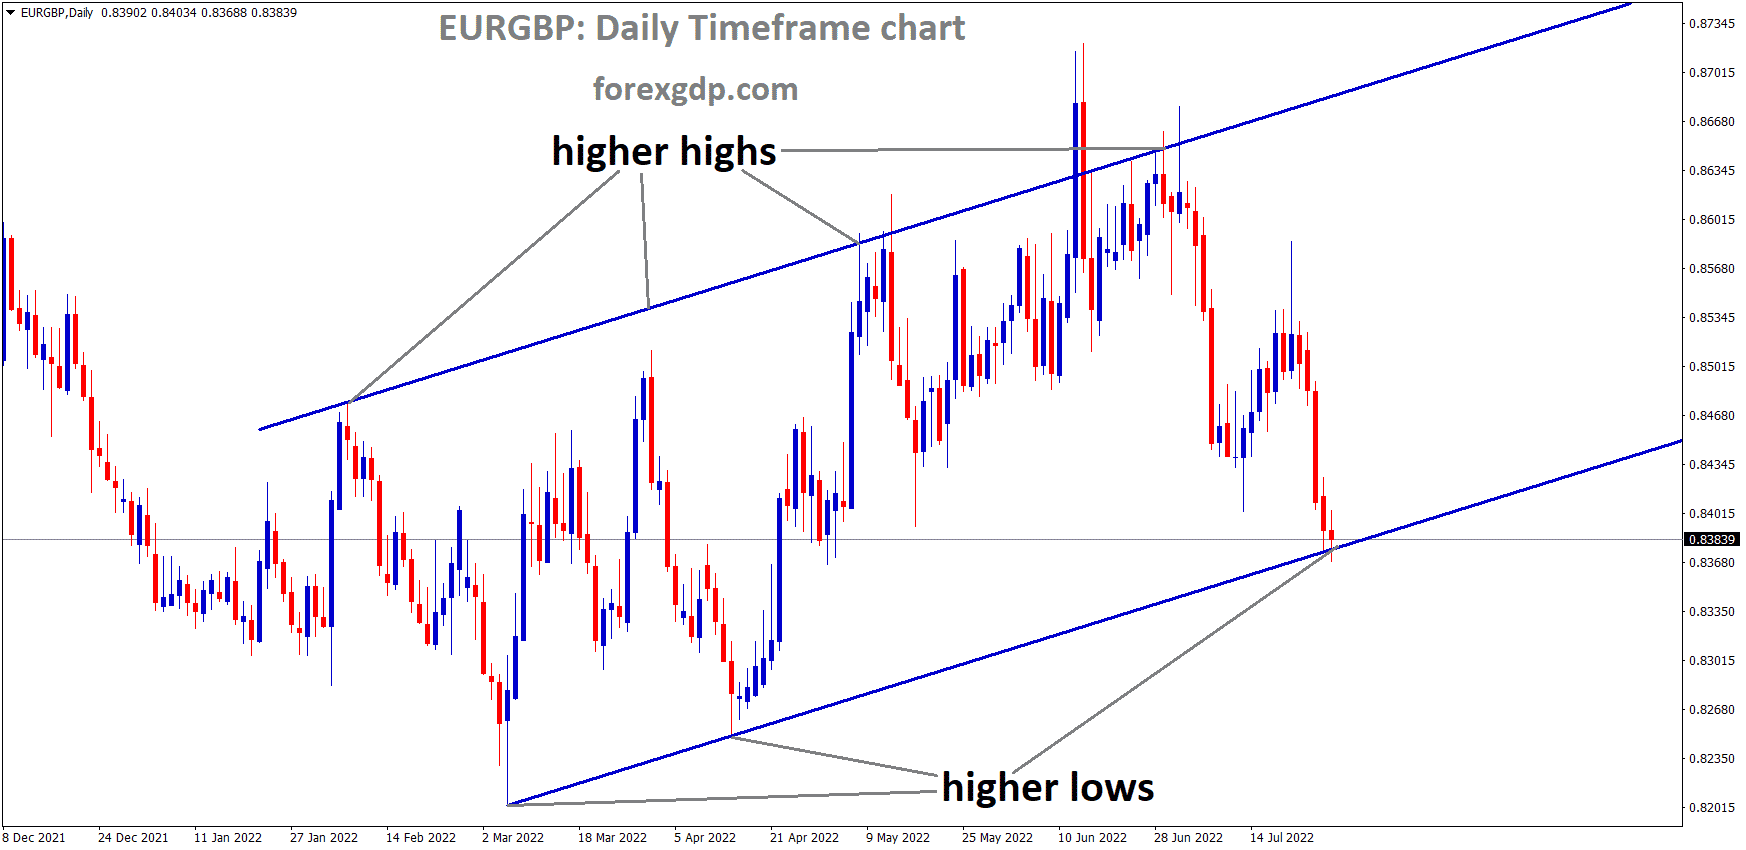 EURGBP is moving in an Ascending channel and the Market has reached the higher low area of the channel